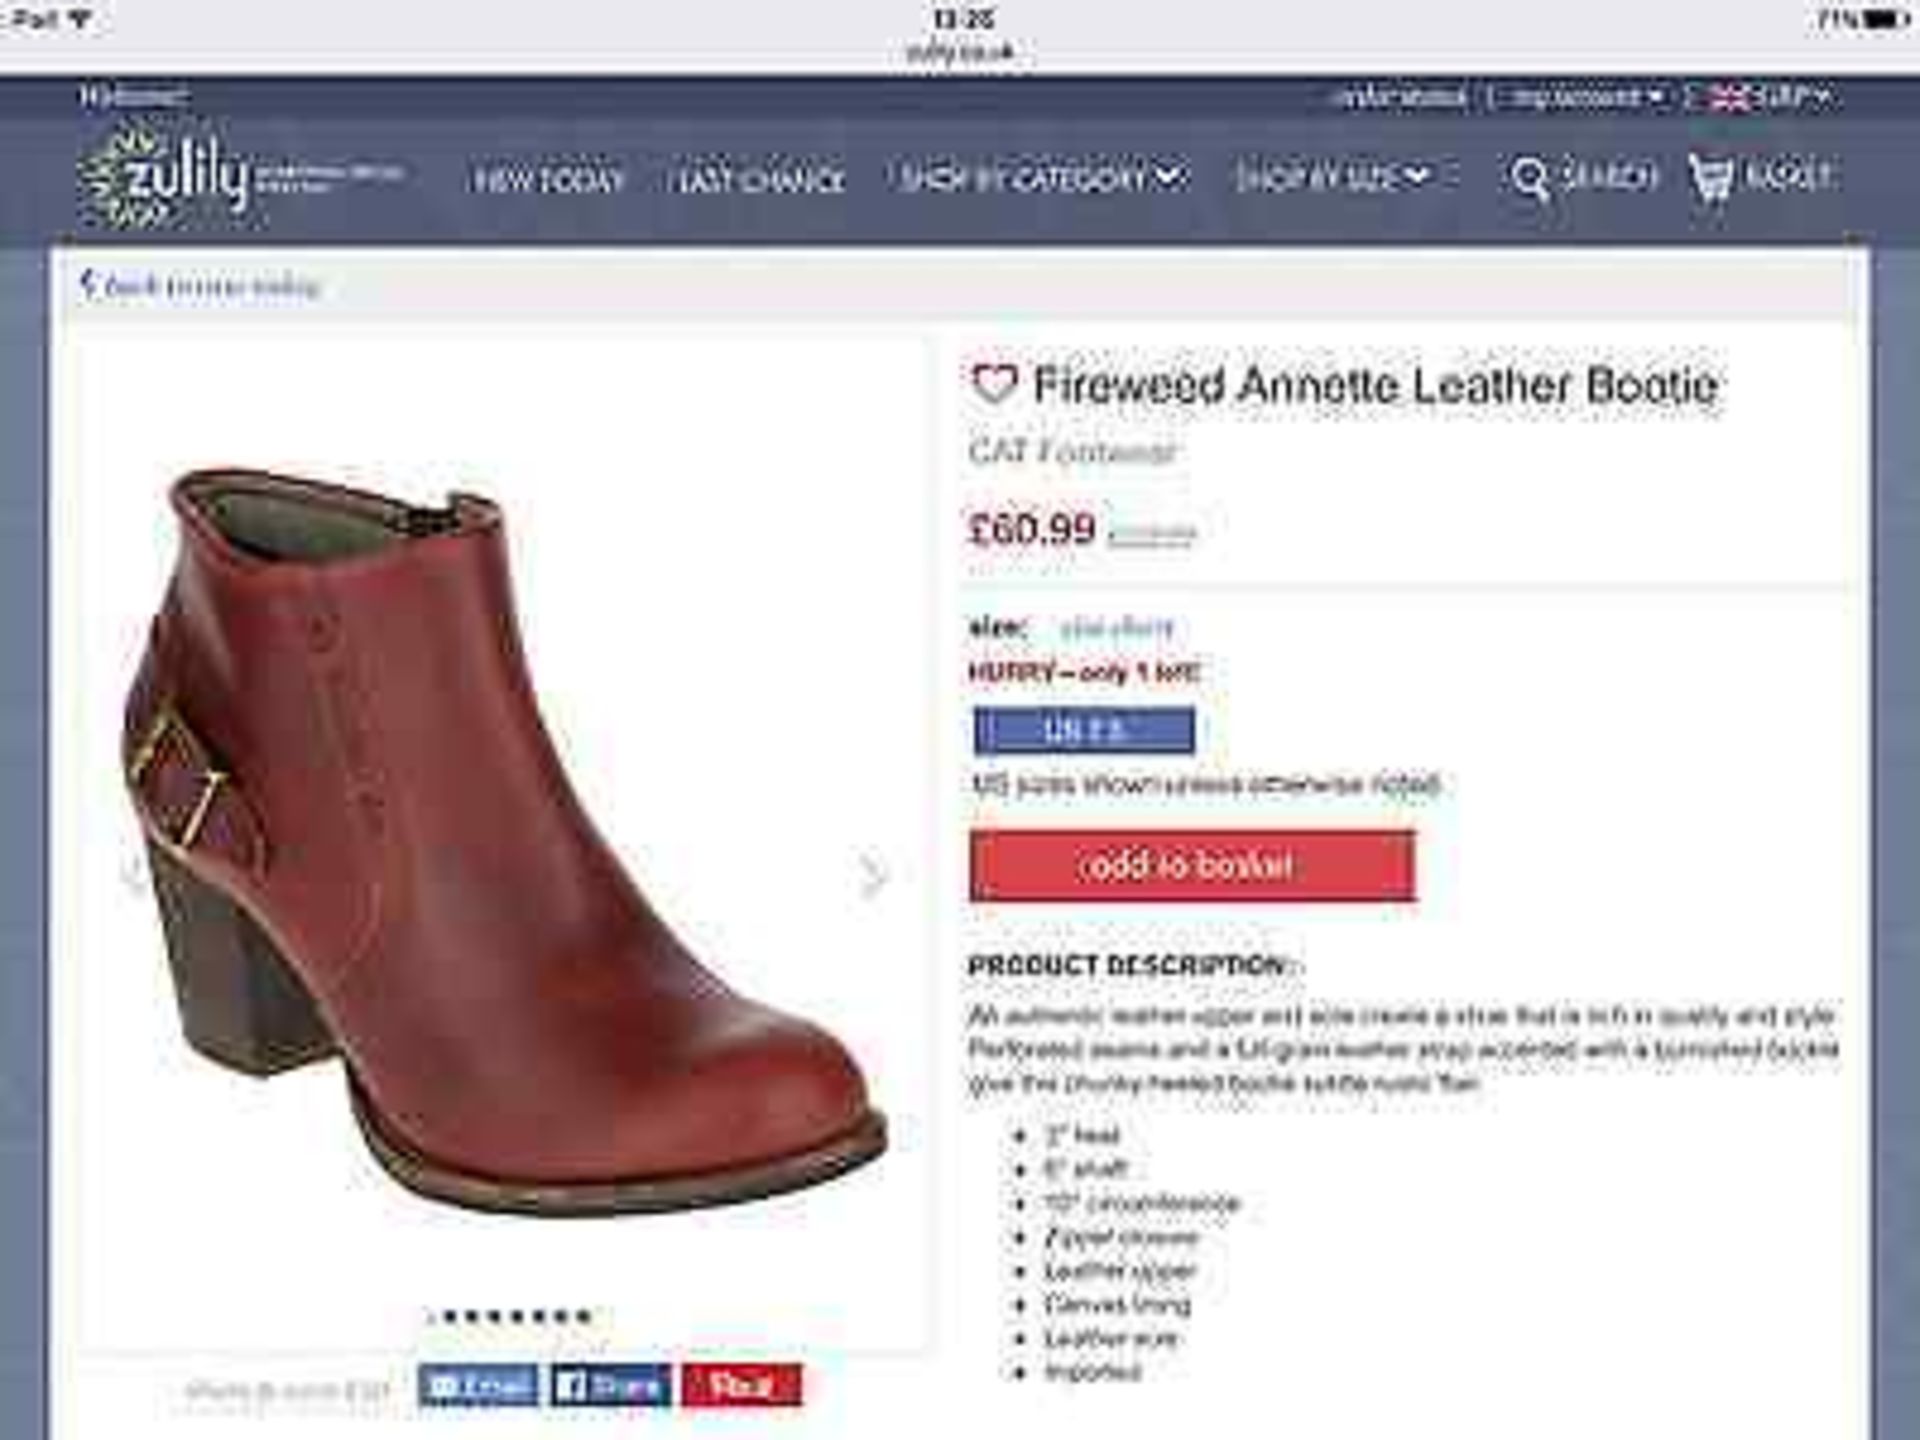 Cat Footwear Firewood Ladies Annette Leather Bootie, size 3.5, RRP £222.99 (New with box) [Ref: ] - Image 7 of 7